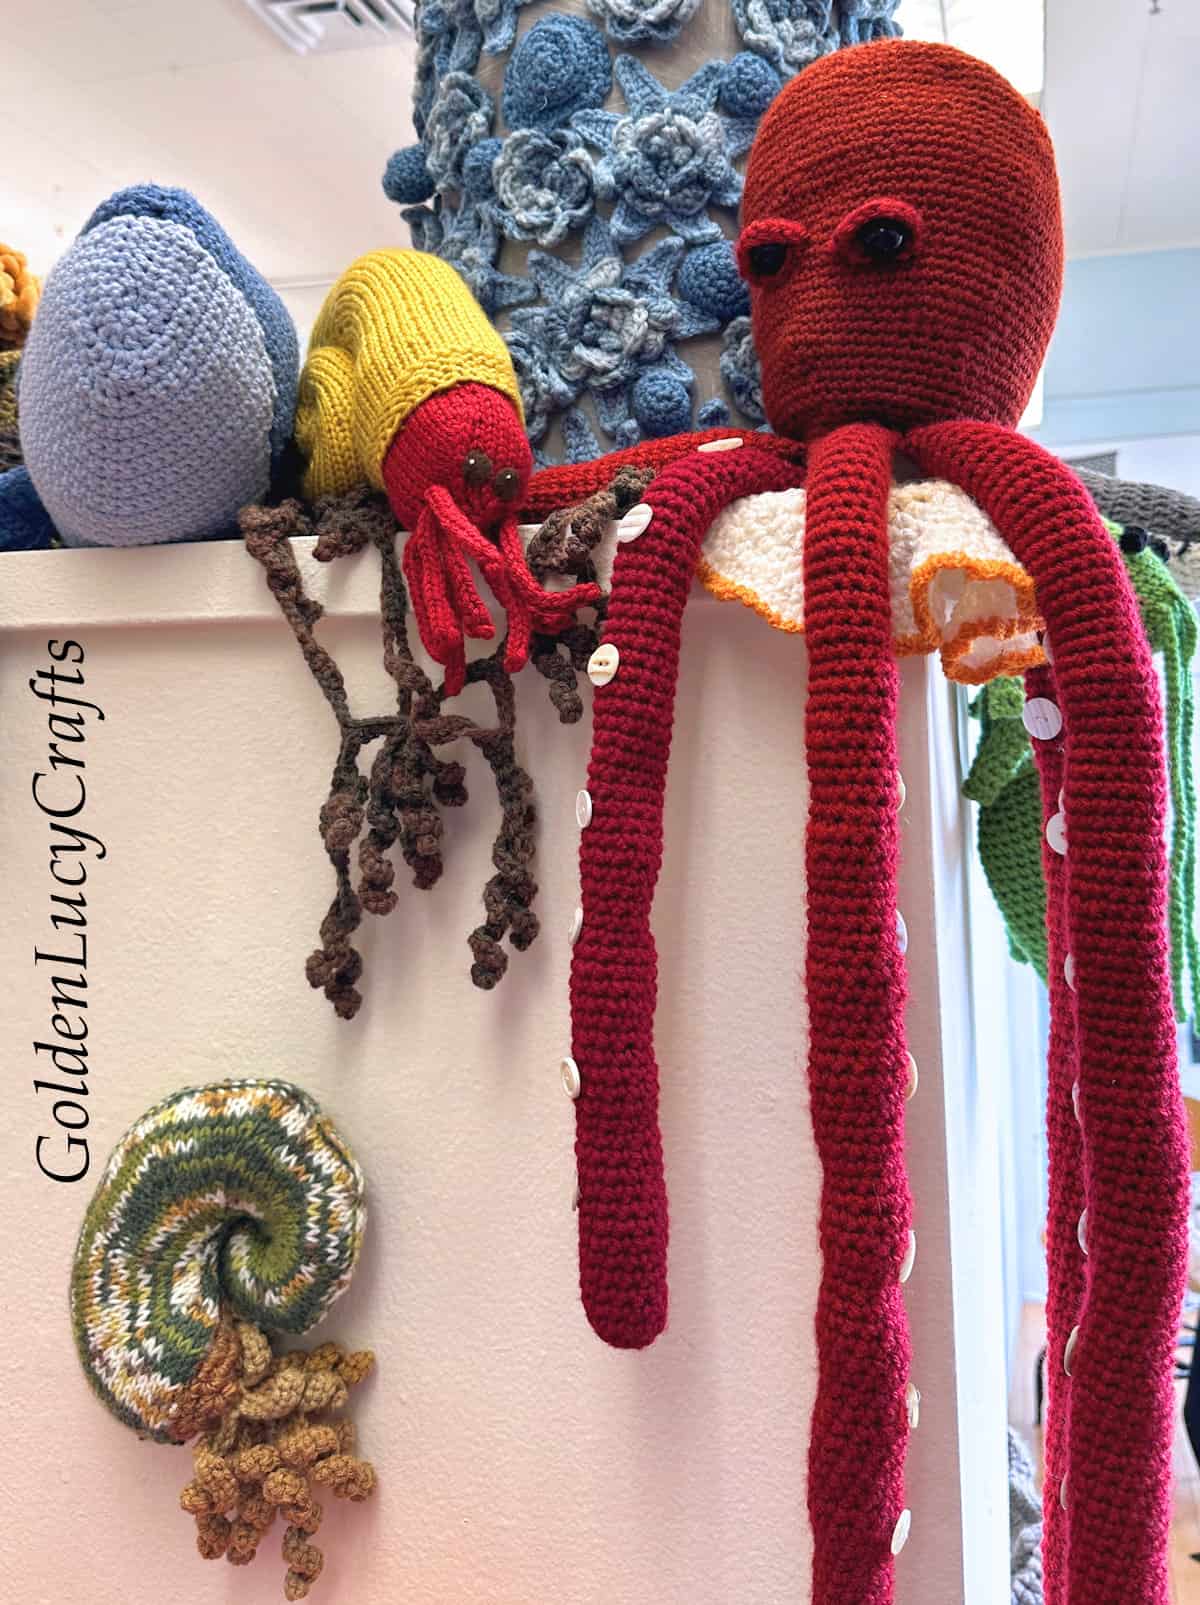 Crocheted large red octopus and other sea creatures.